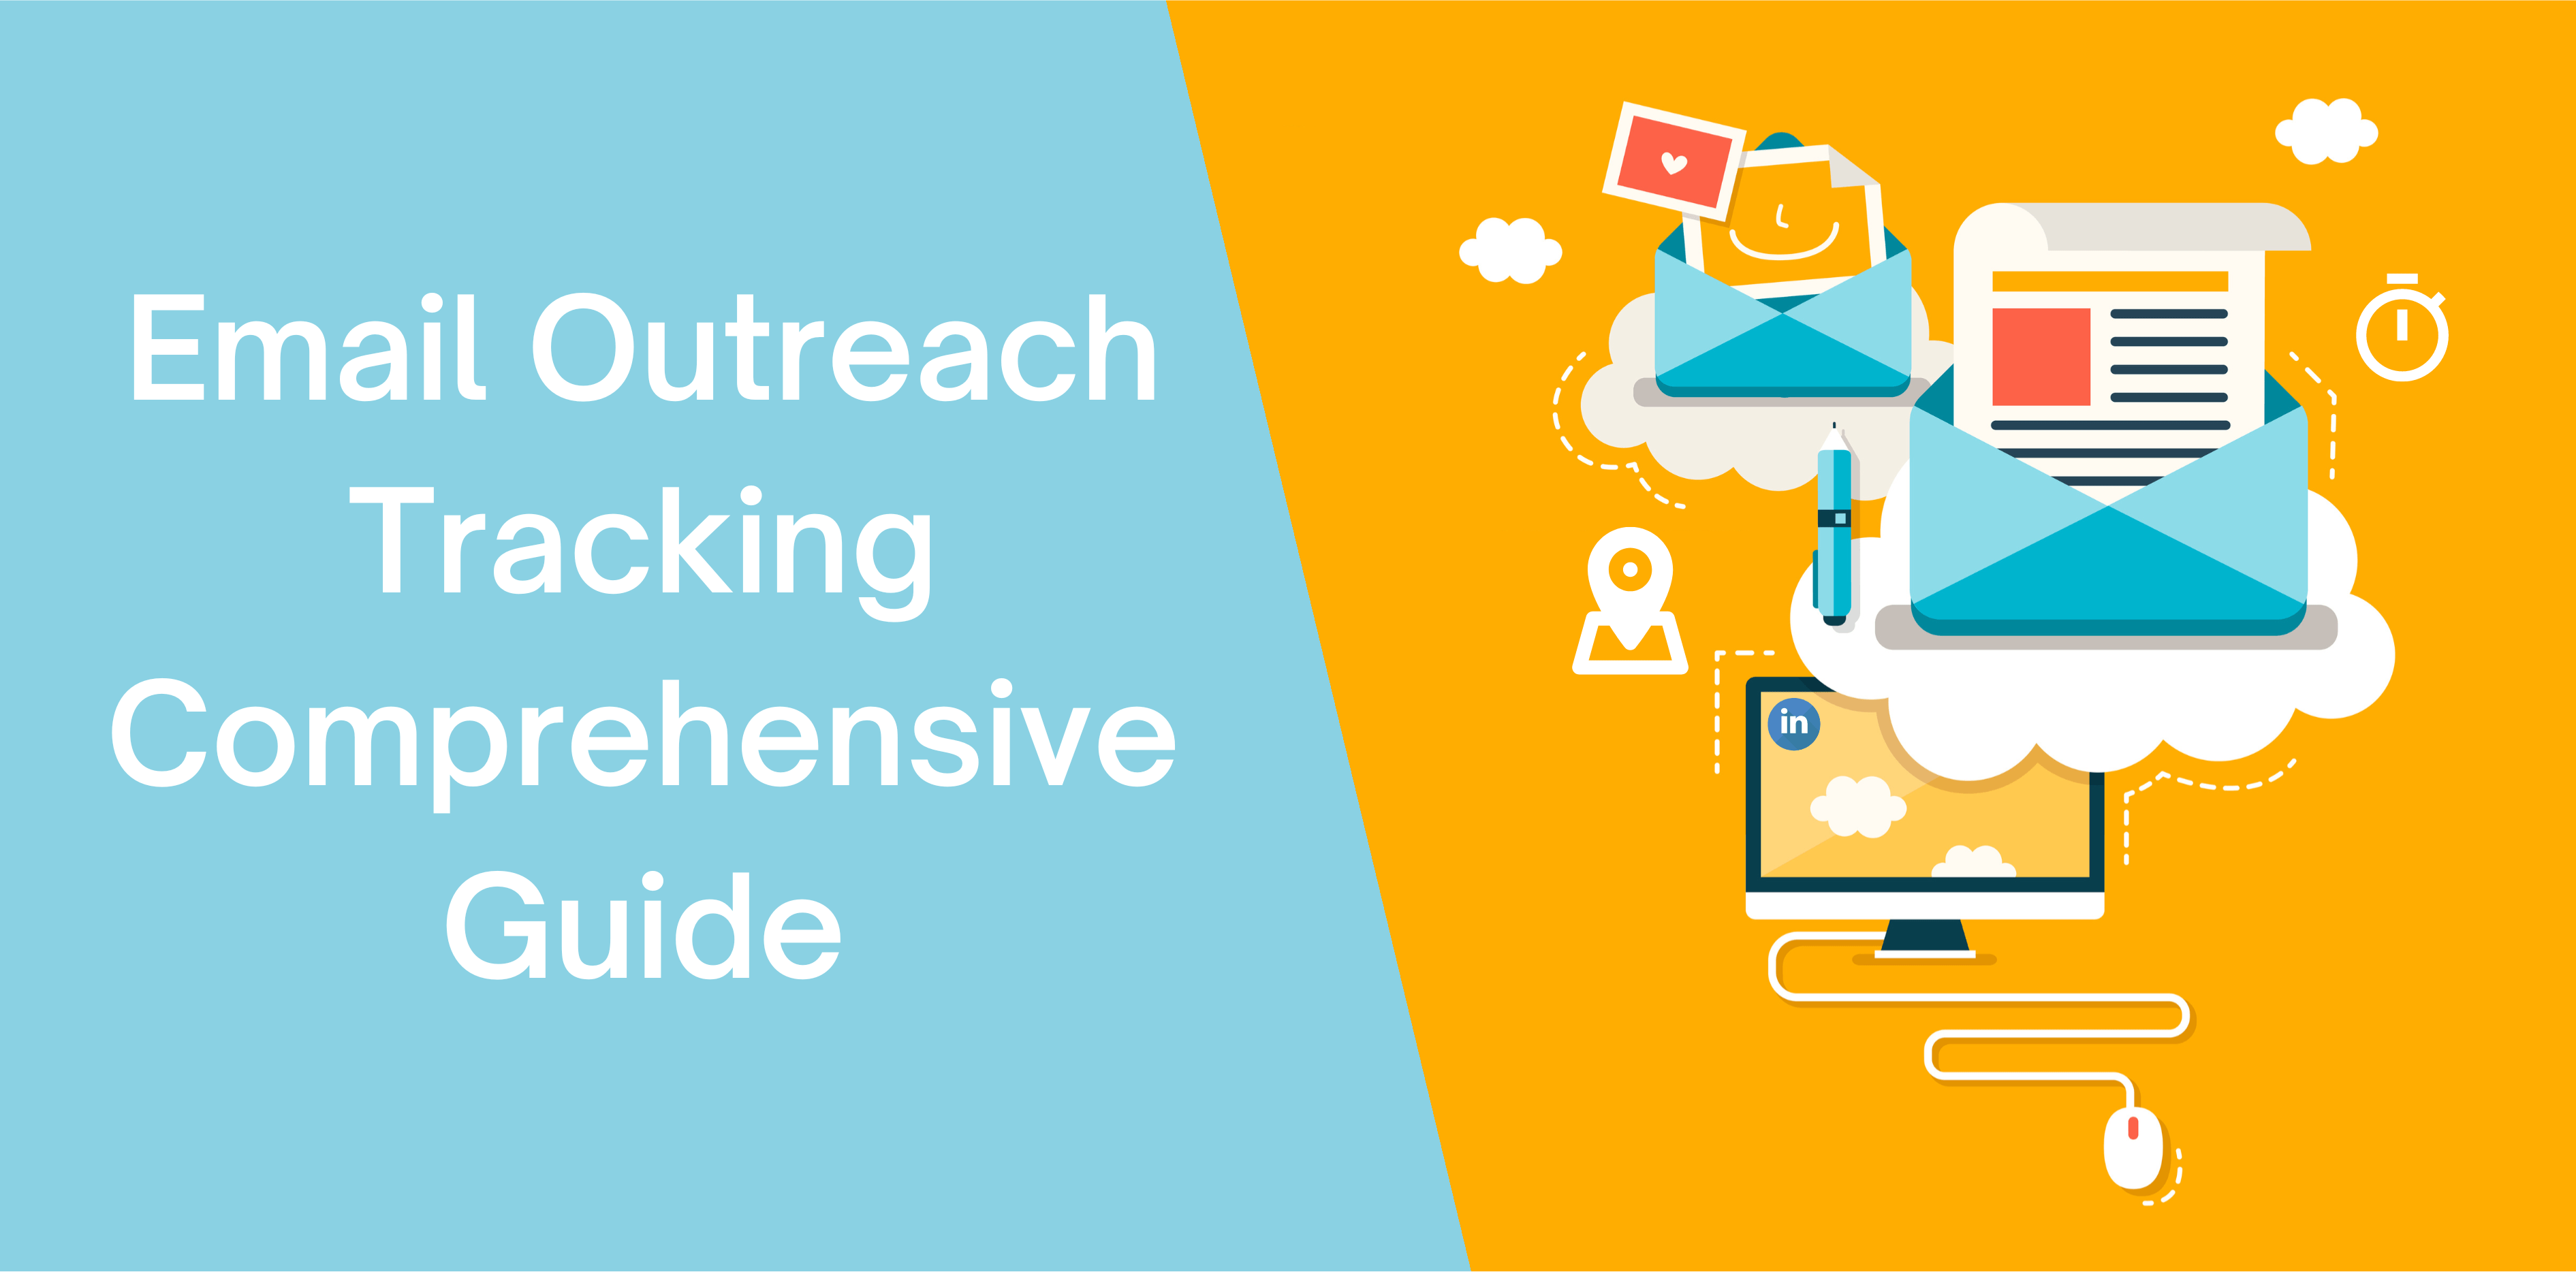 Thumbnail-Email-Outreach-Tracking-Comprehensive-Guide